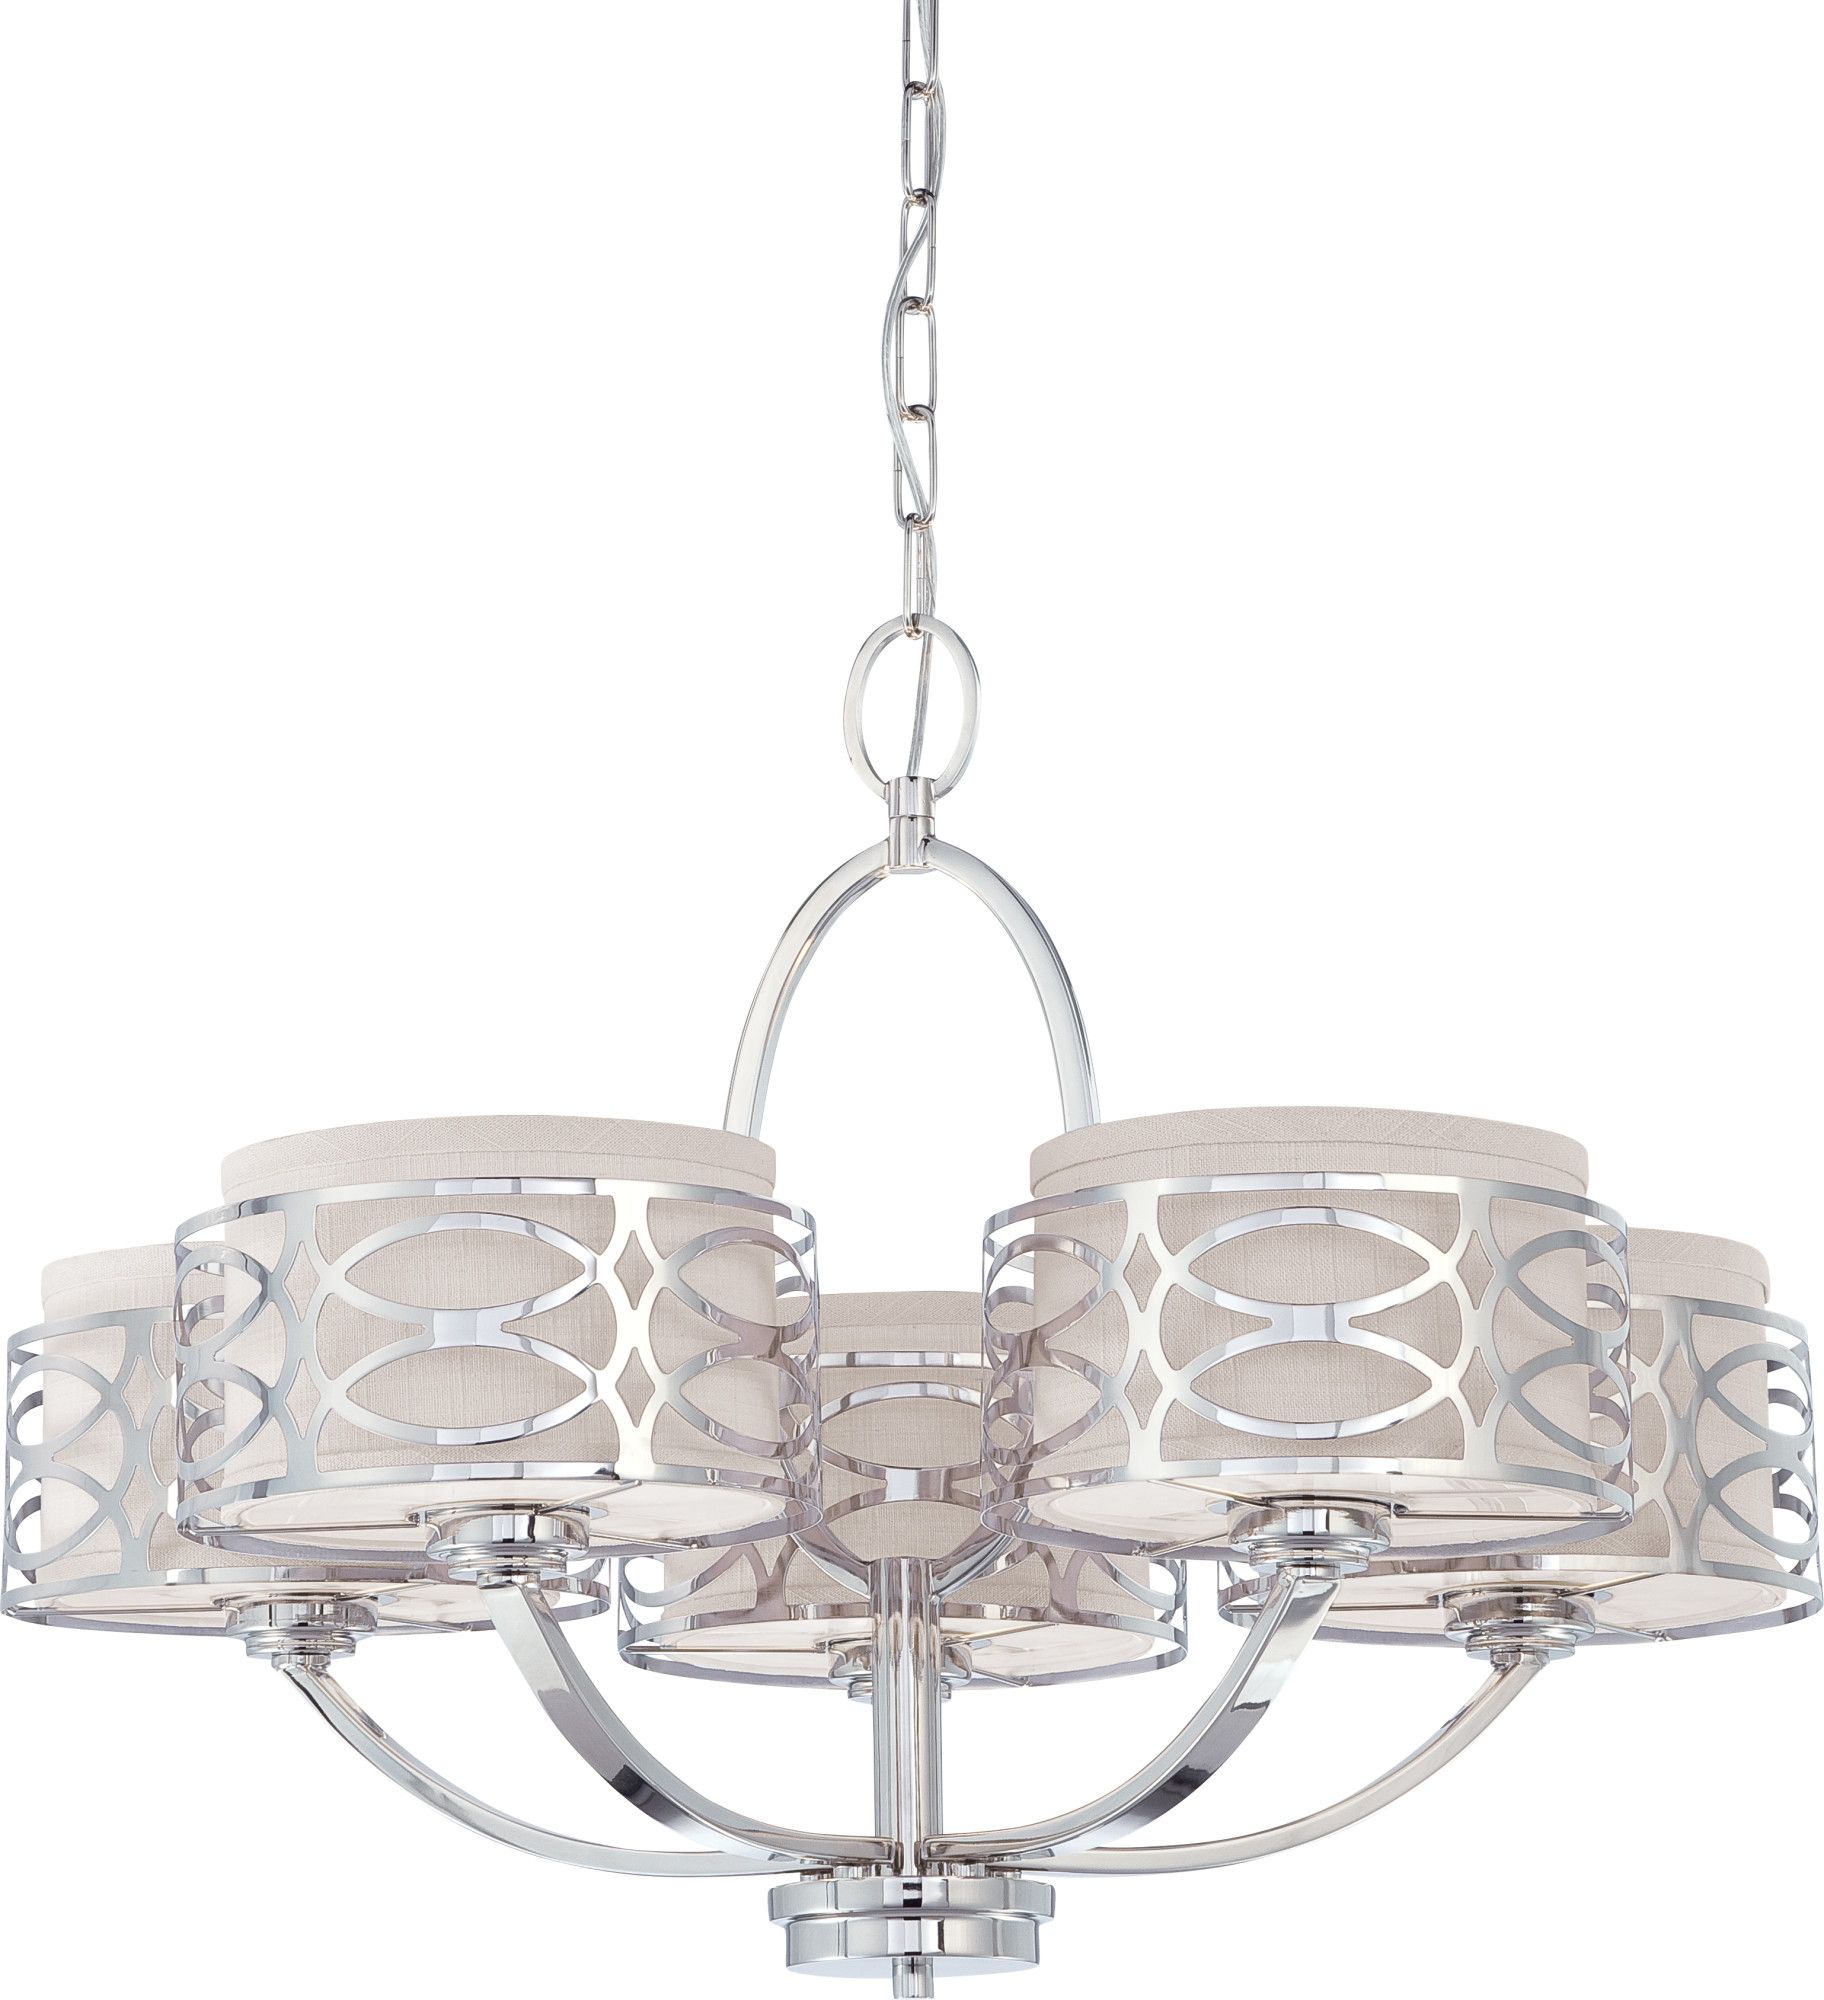 5 Light – Chandelier – Slate Gray Fabric Shades – Walmart Inside Stone Gray And Nickel Chandeliers (View 4 of 15)